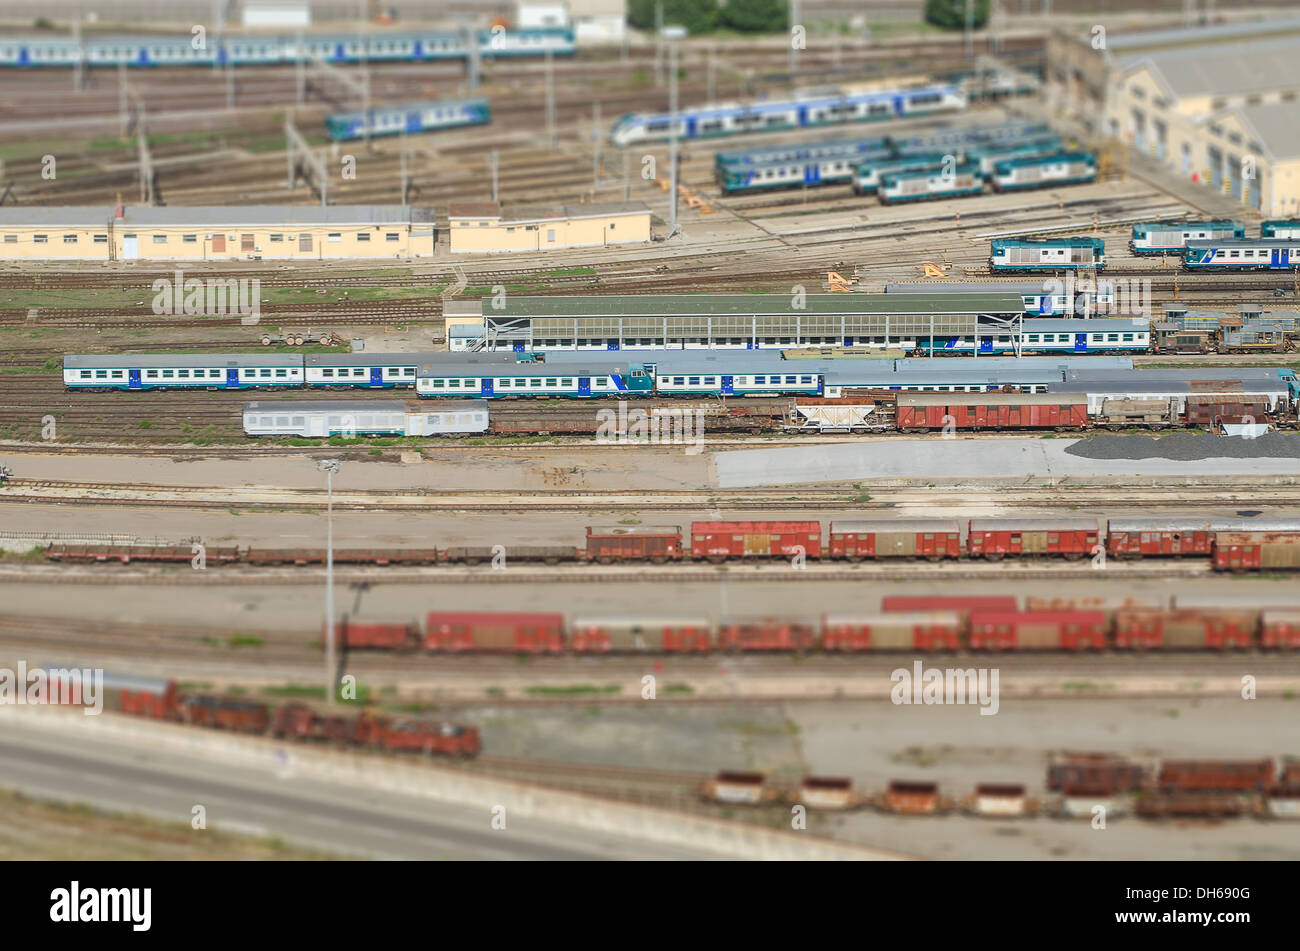 Aerial view of railway transport Stock Photo